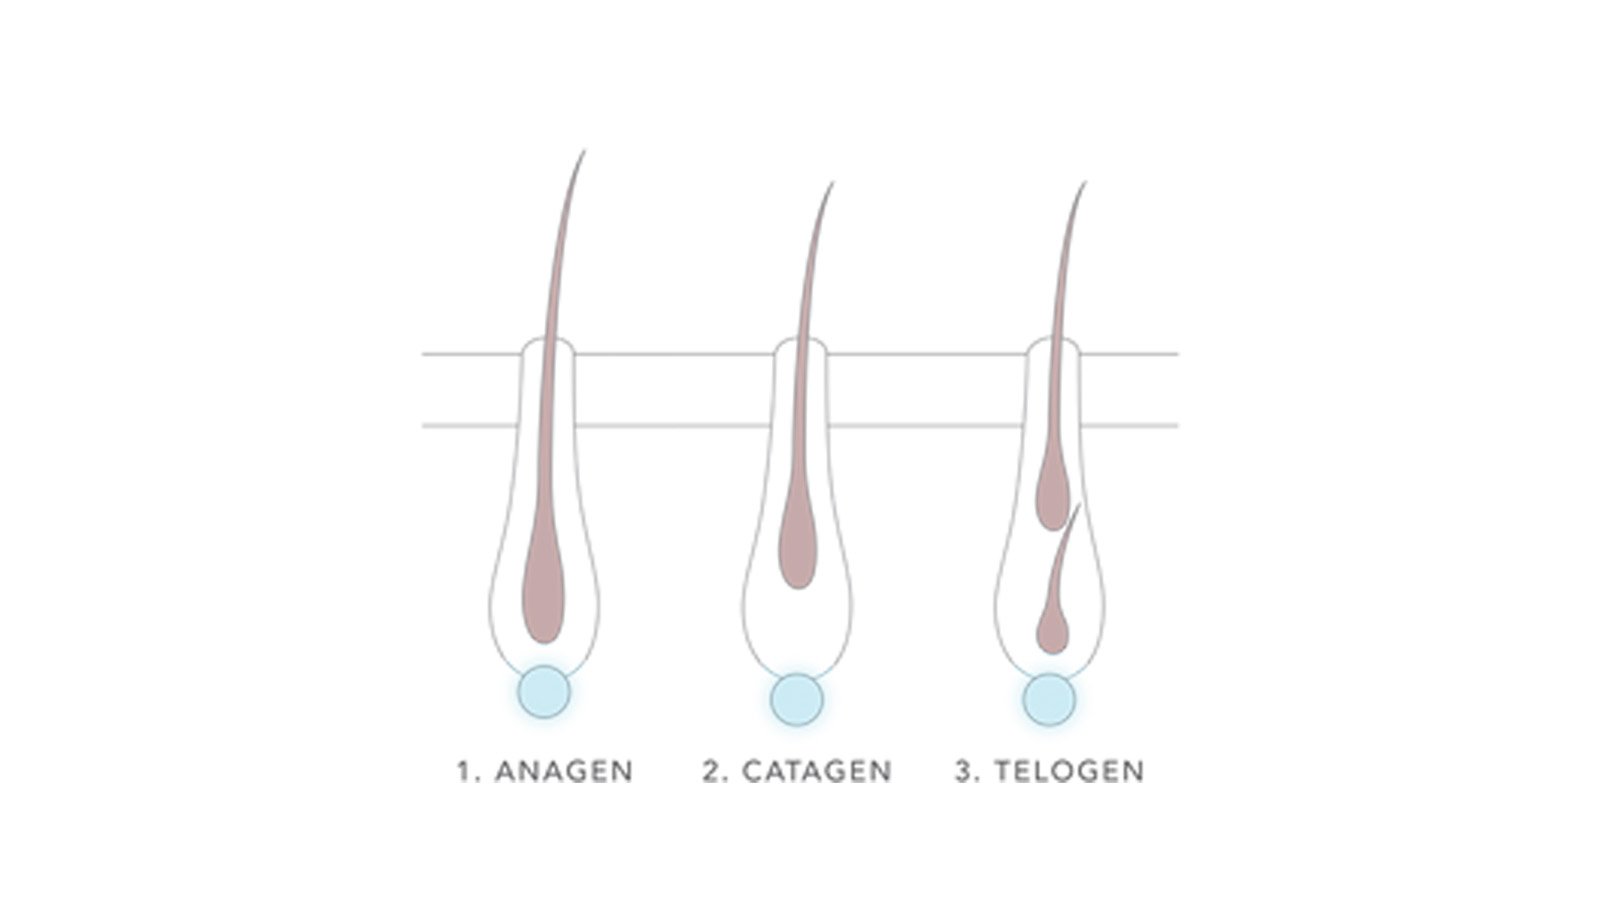 Diagram showing the 3 hair growth phases: Anagen, Catagen, and Telogen.